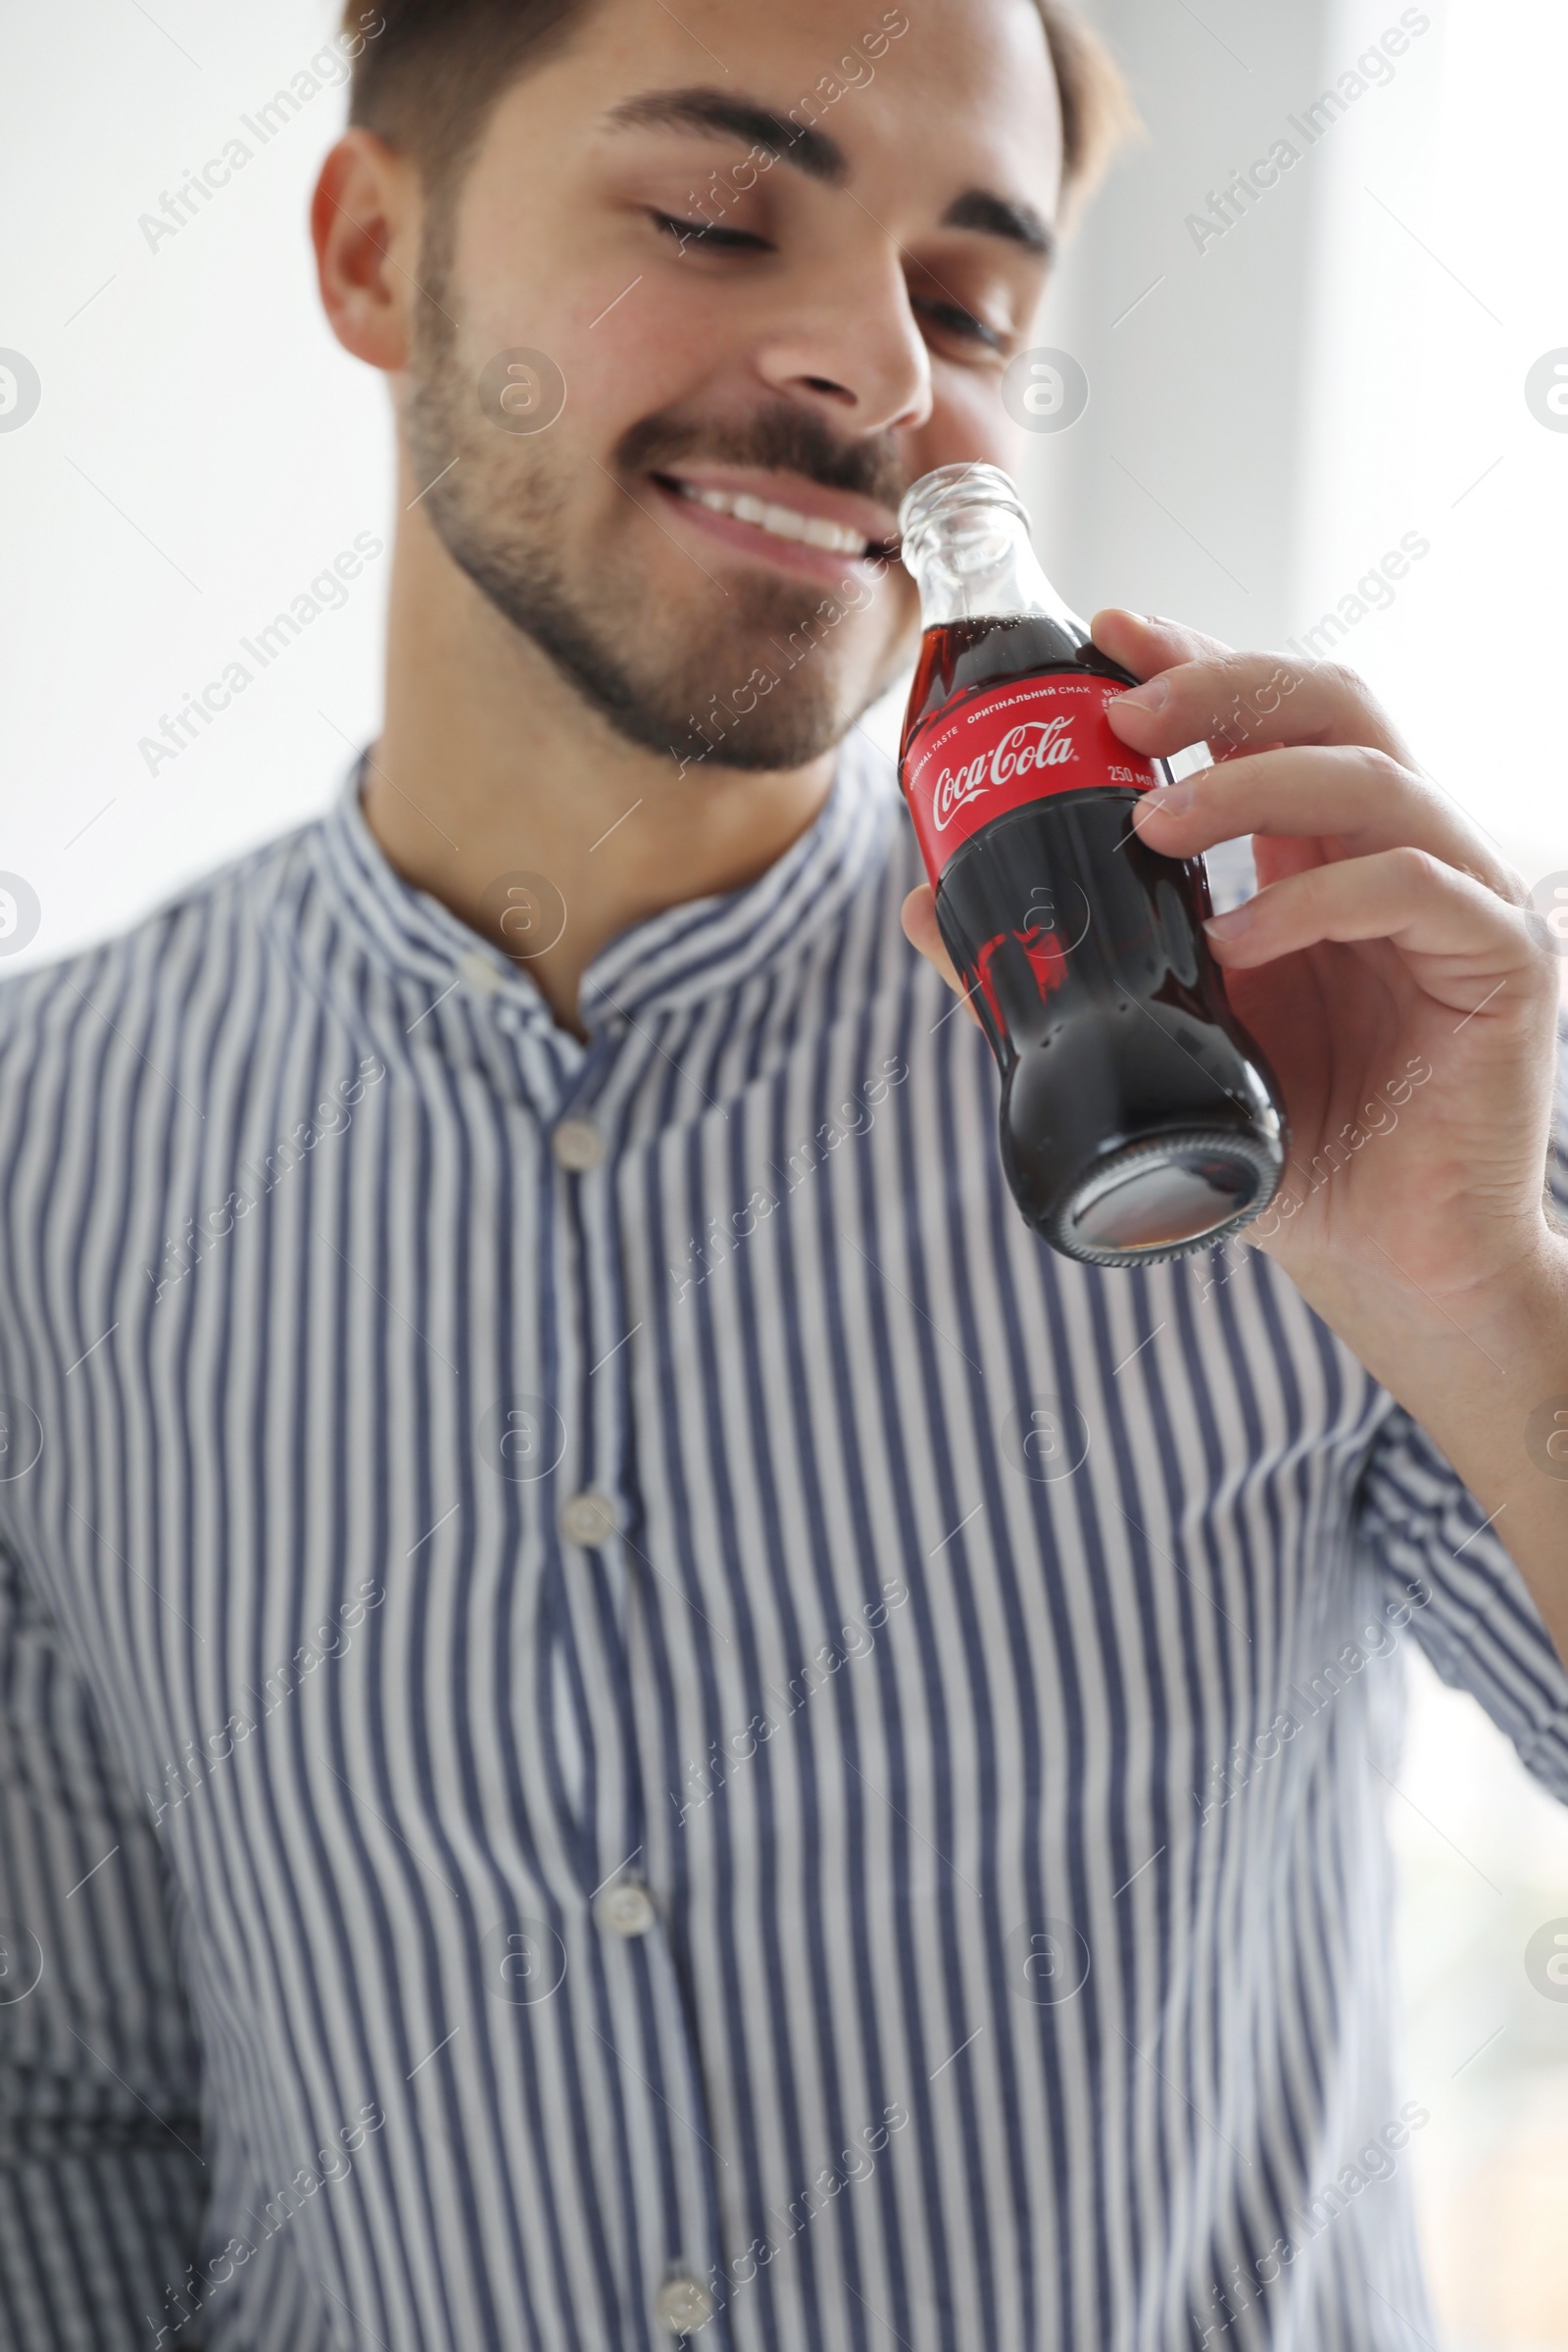 Photo of MYKOLAIV, UKRAINE - NOVEMBER 28, 2018: Young man with bottle of Coca-Cola indoors